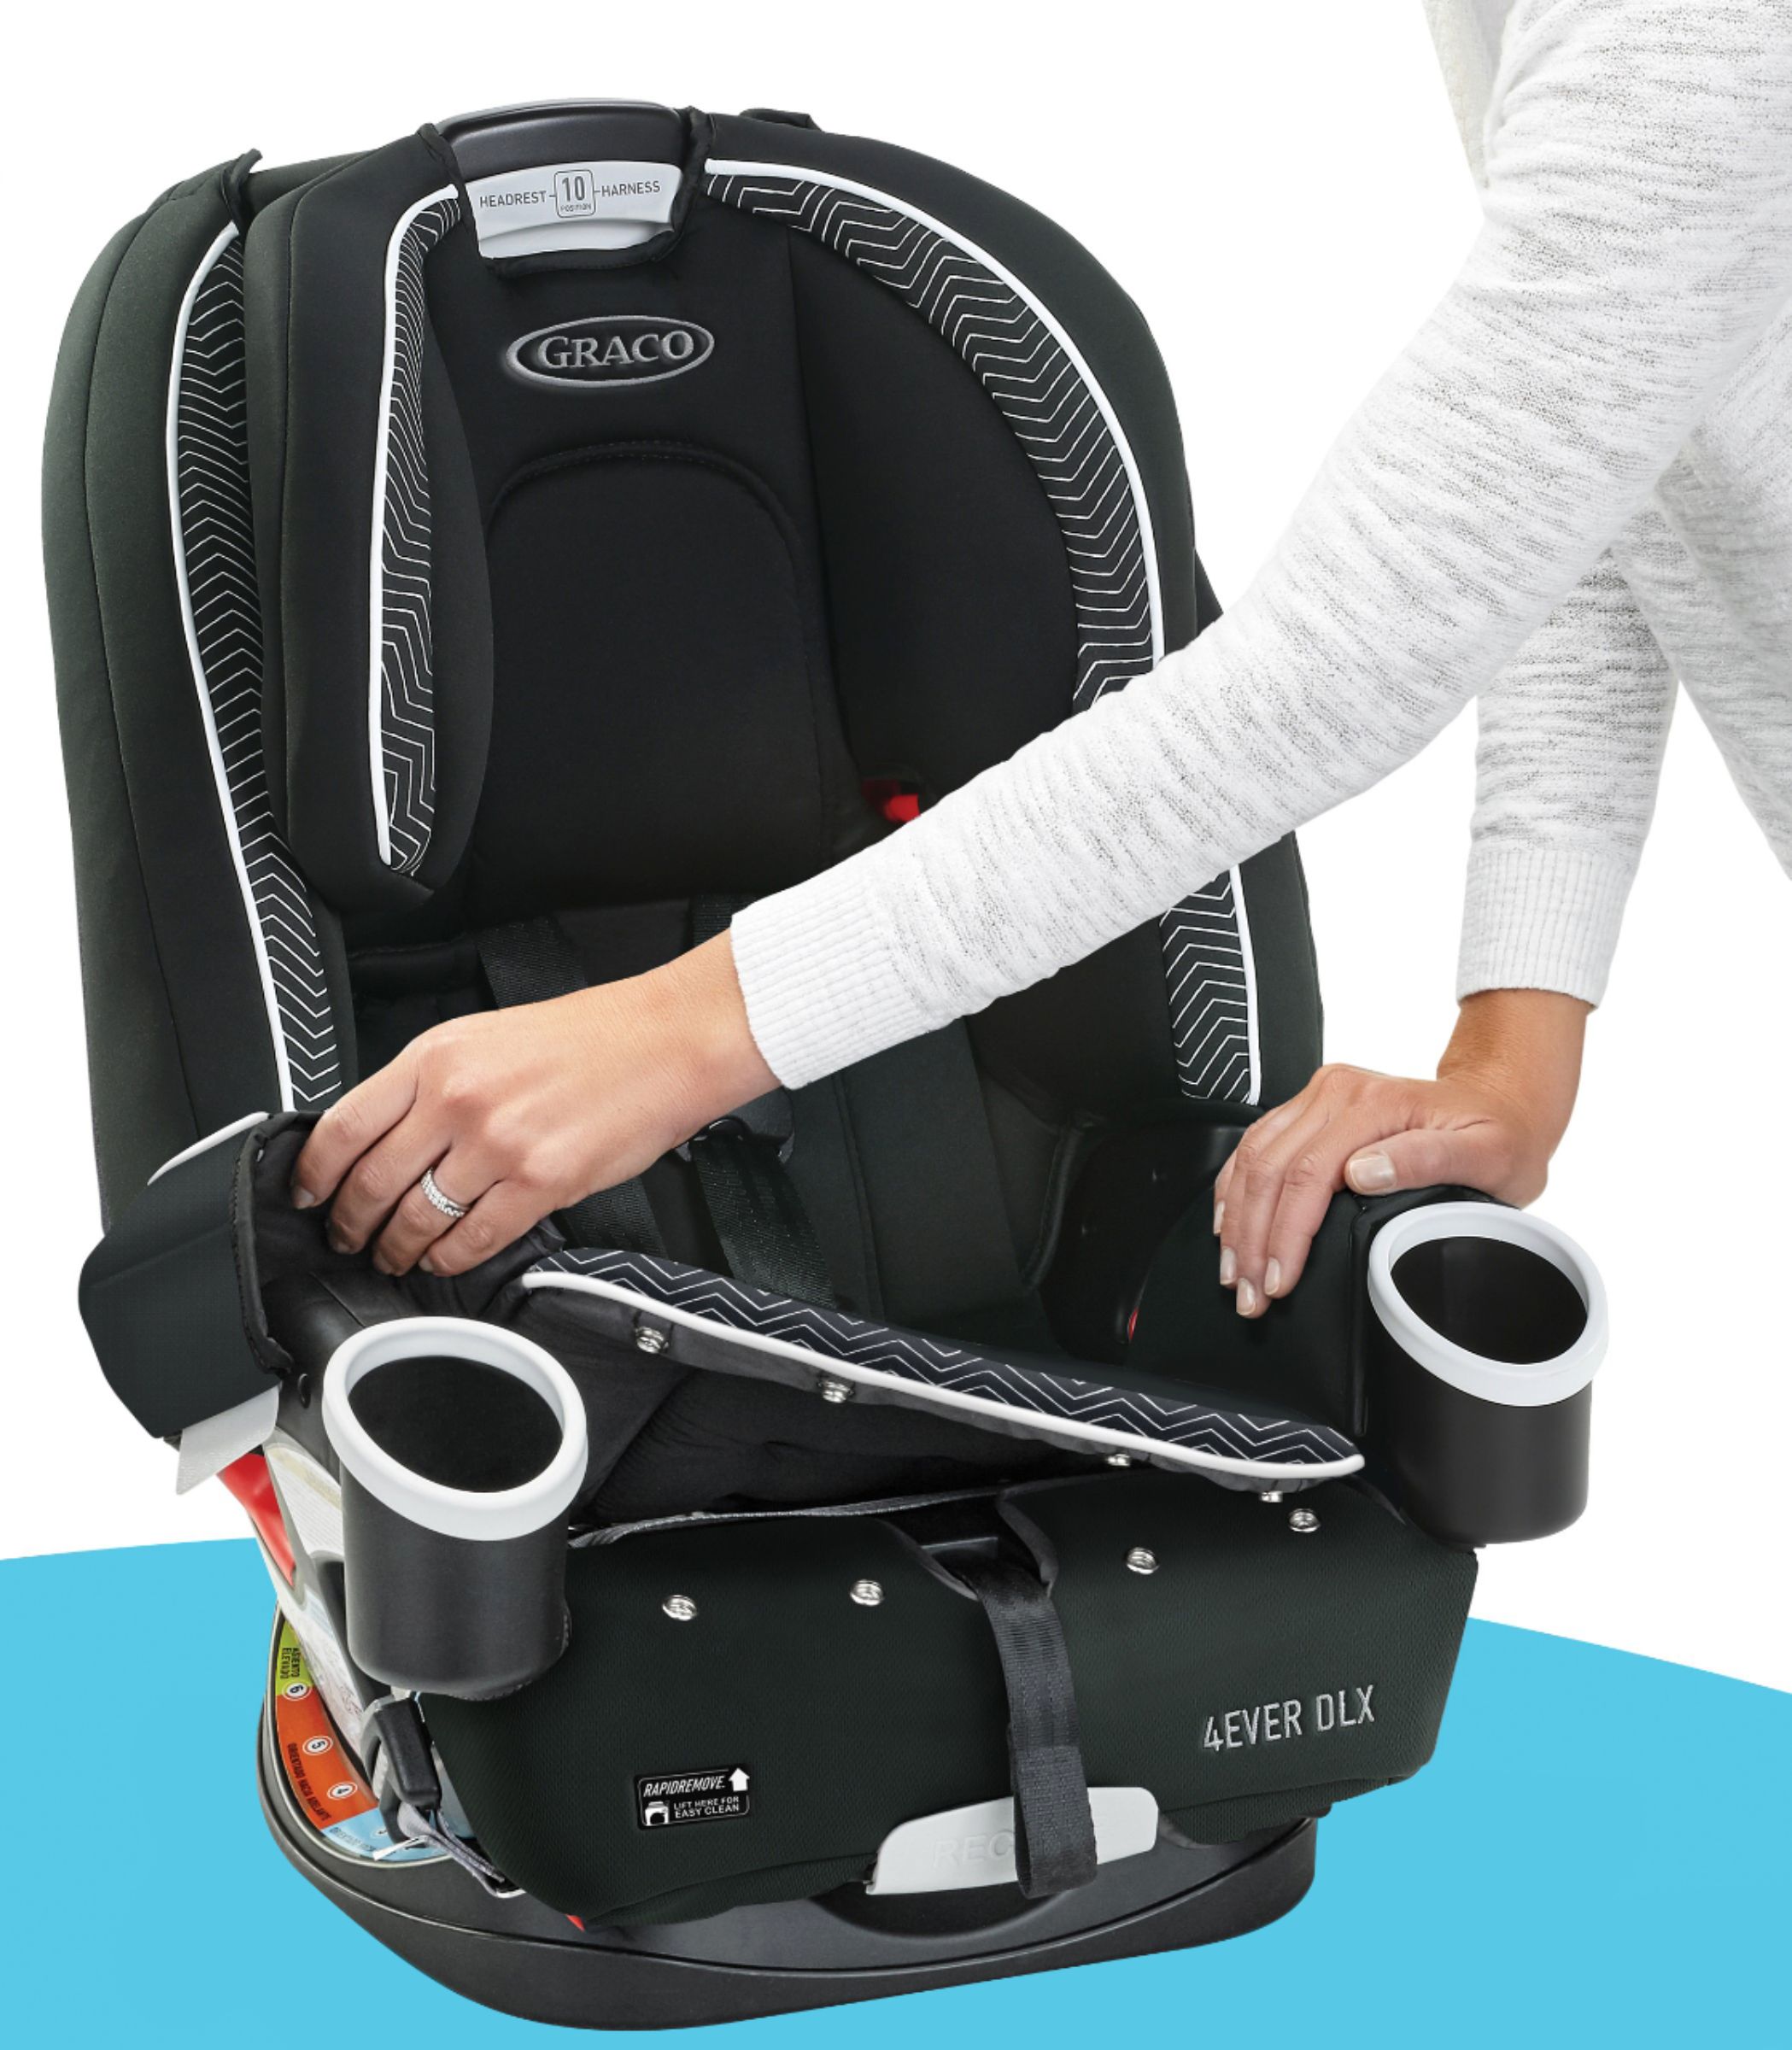 Graco 4ever Dlx 4 In 1 Car Seat Zagg Best Buy